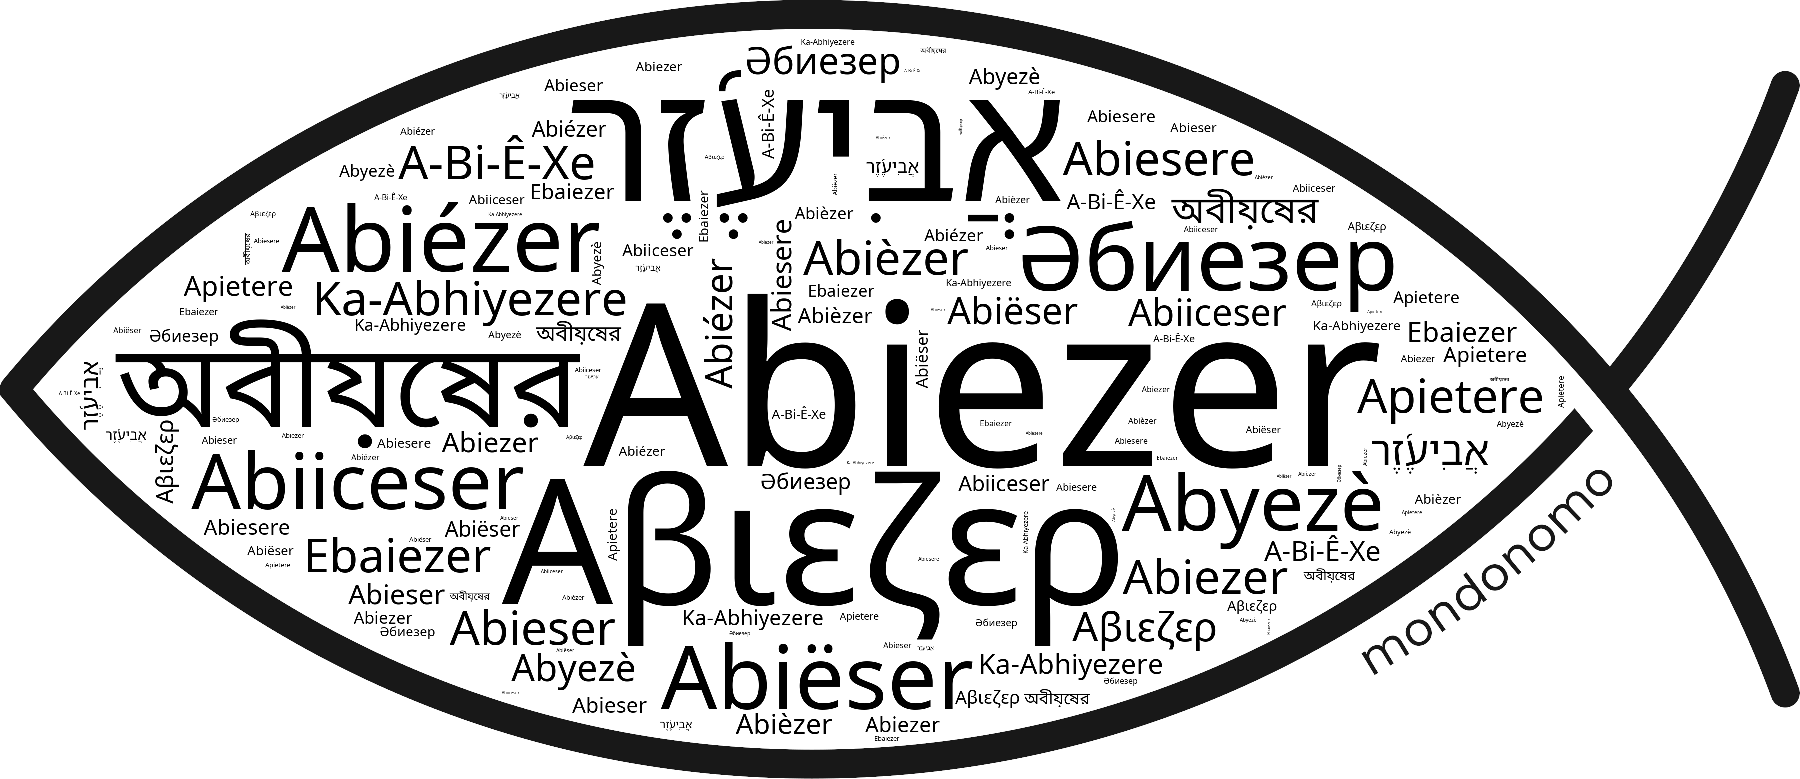 Name Abiezer in the world's Bibles